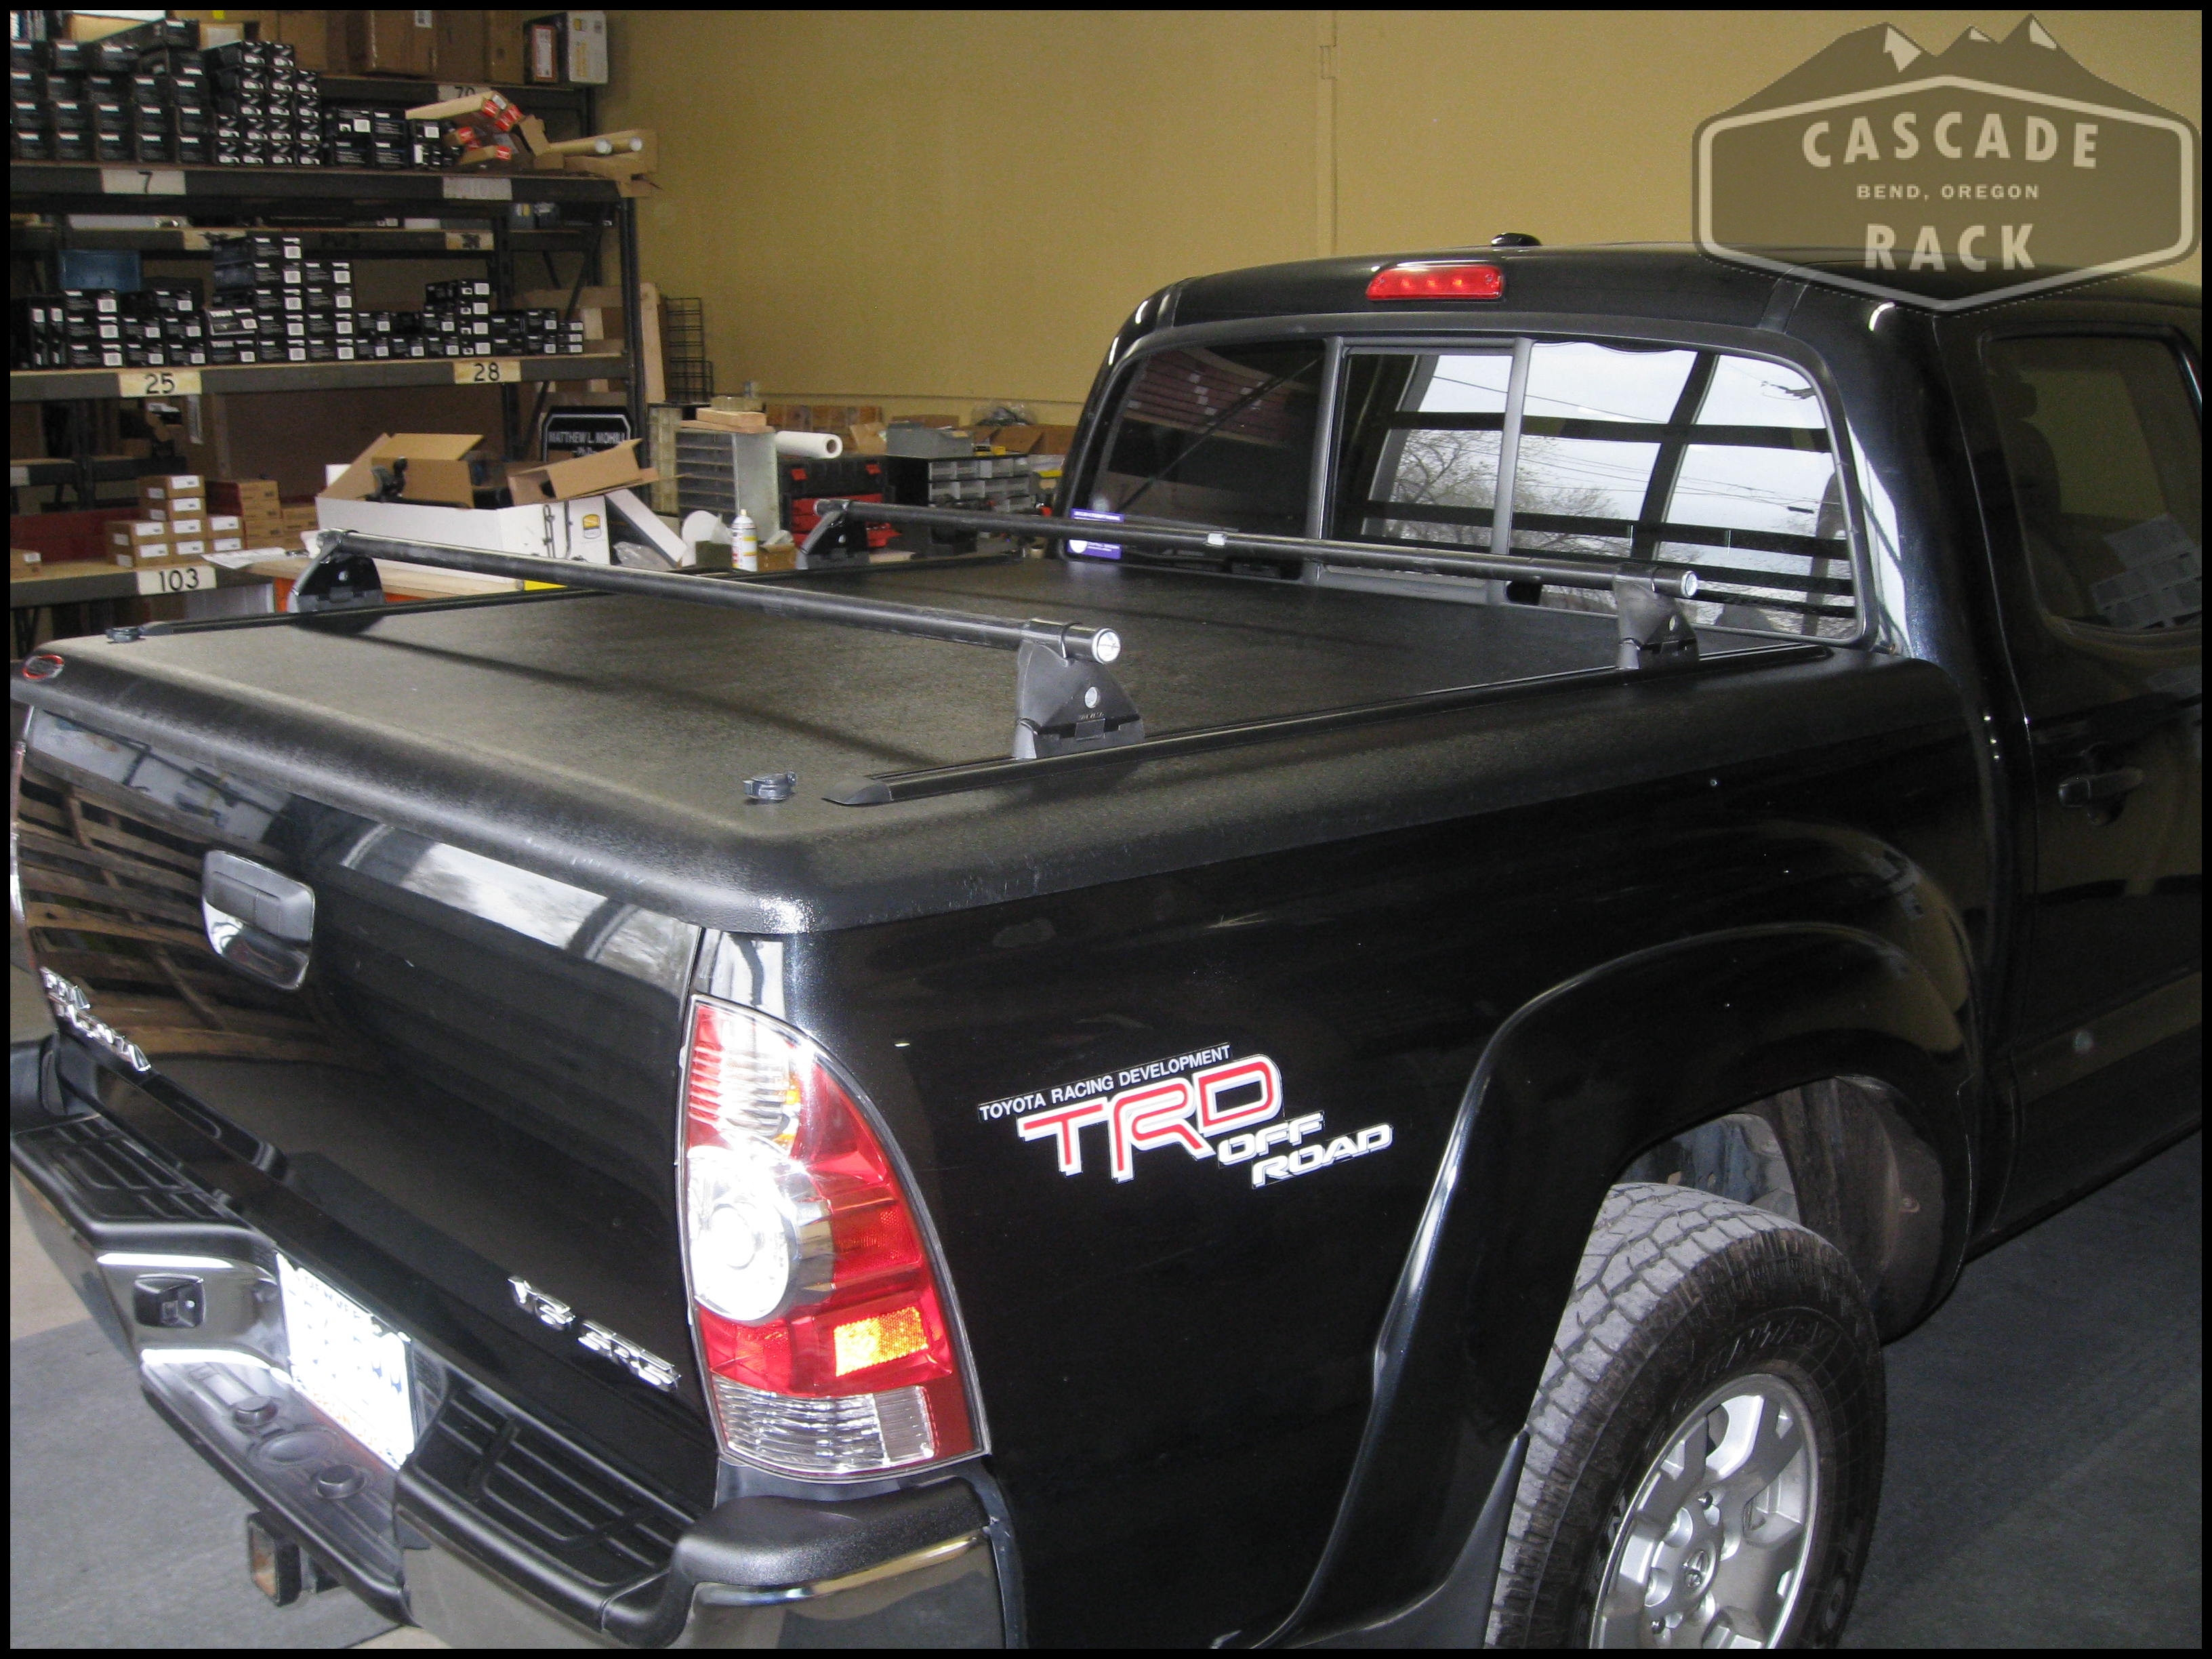 Toyota Truck Bed Cover 76 Toyota Pickup Truck Bed Covers Cascade Rack Installation Undercover